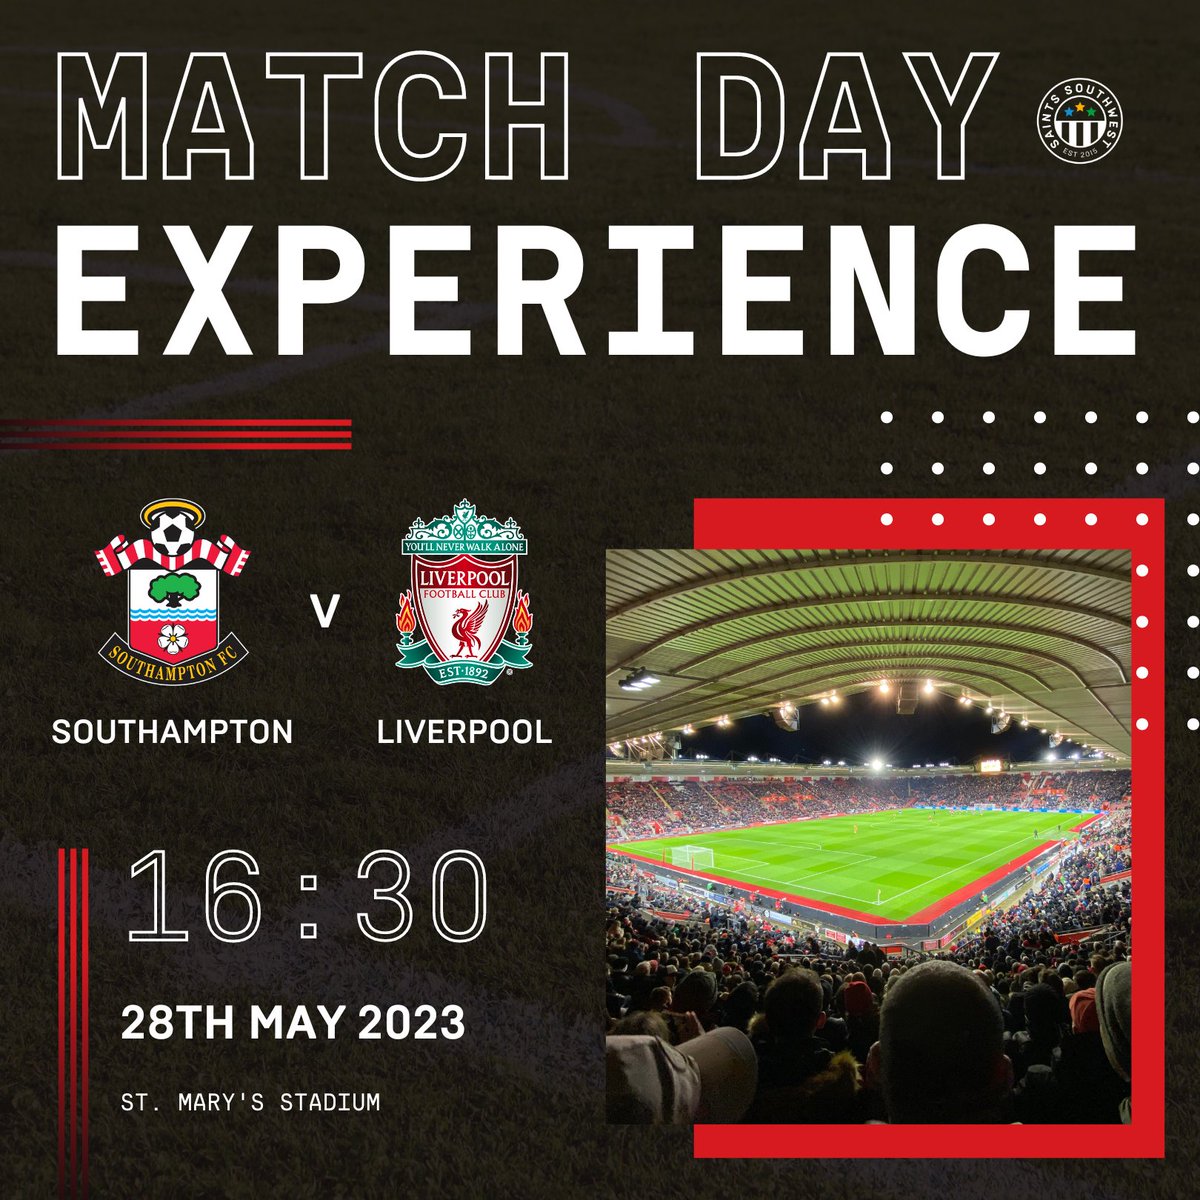 🔴 MATCH DAY EXPERIENCE TRIP

⚽️ It's the FINAL DAY of the Premier League season – and we're off to see some of the action for ourselves! Head over to our Facebook for lots of content from @SouthamptonFC versus @LFC, our last Match Day Experience Trip of the season.

#saintssw
😇